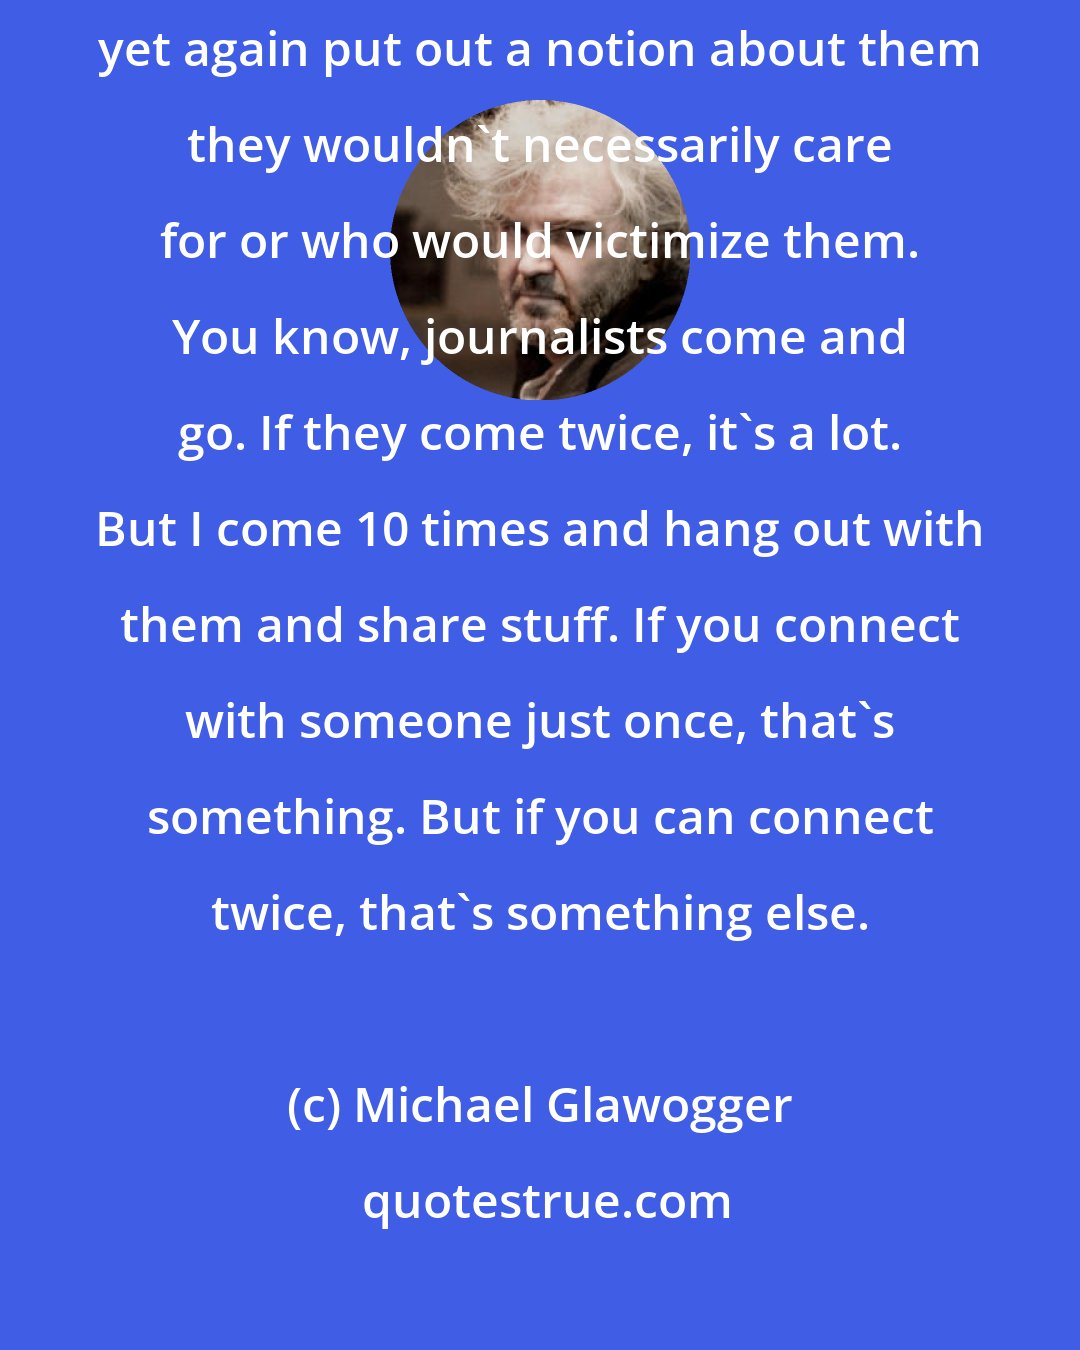 Michael Glawogger: I had to first convince them [prostitutes] that I wasn't a journalist who would yet again put out a notion about them they wouldn't necessarily care for or who would victimize them. You know, journalists come and go. If they come twice, it's a lot. But I come 10 times and hang out with them and share stuff. If you connect with someone just once, that's something. But if you can connect twice, that's something else.